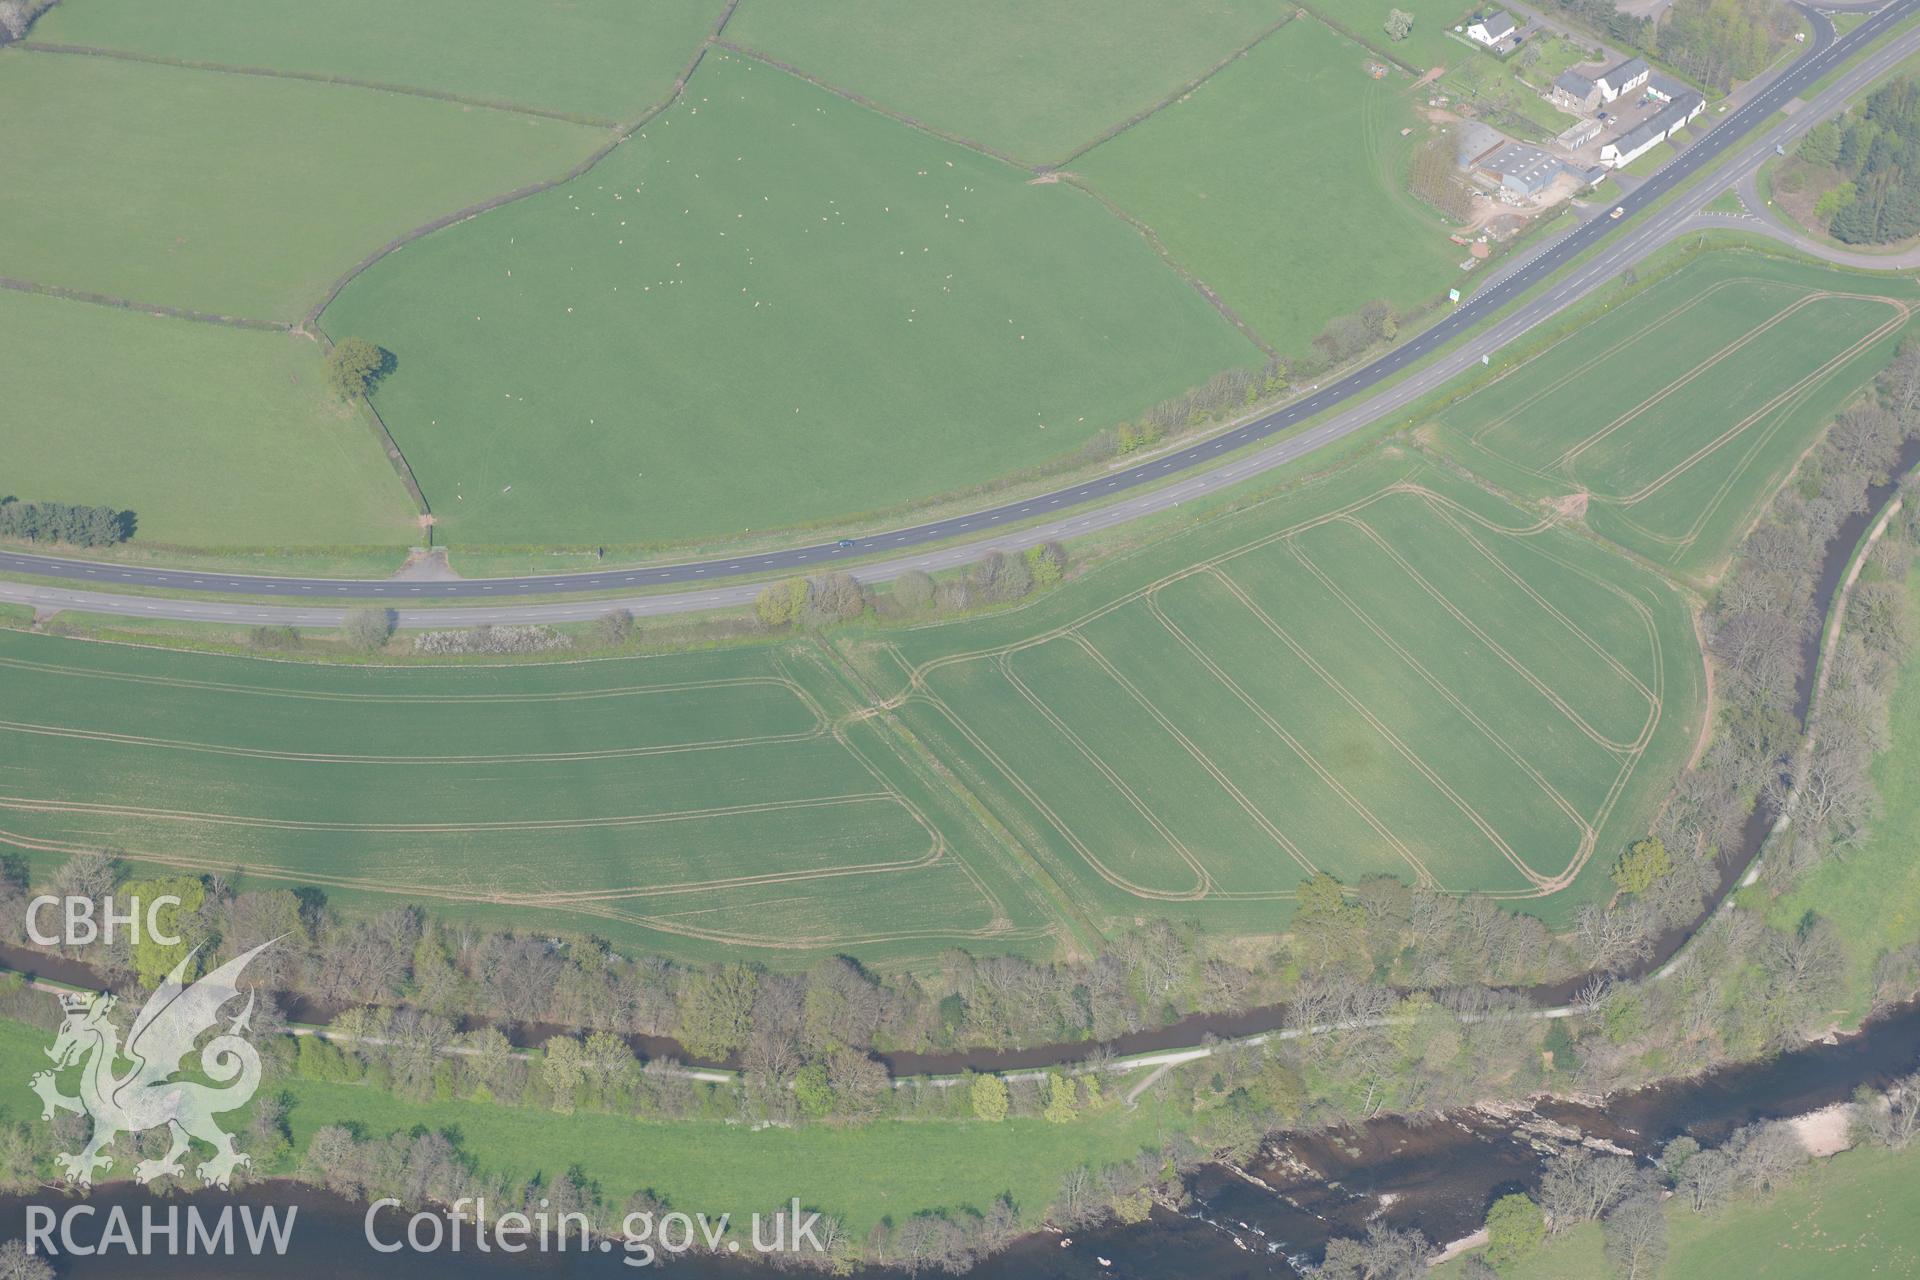 Cefn-Brynich Roman Fort and Cefn Brynich Farm. Oblique aerial photograph taken during the Royal Commission's programme of archaeological aerial reconnaissance by Toby Driver on 21st April 2015